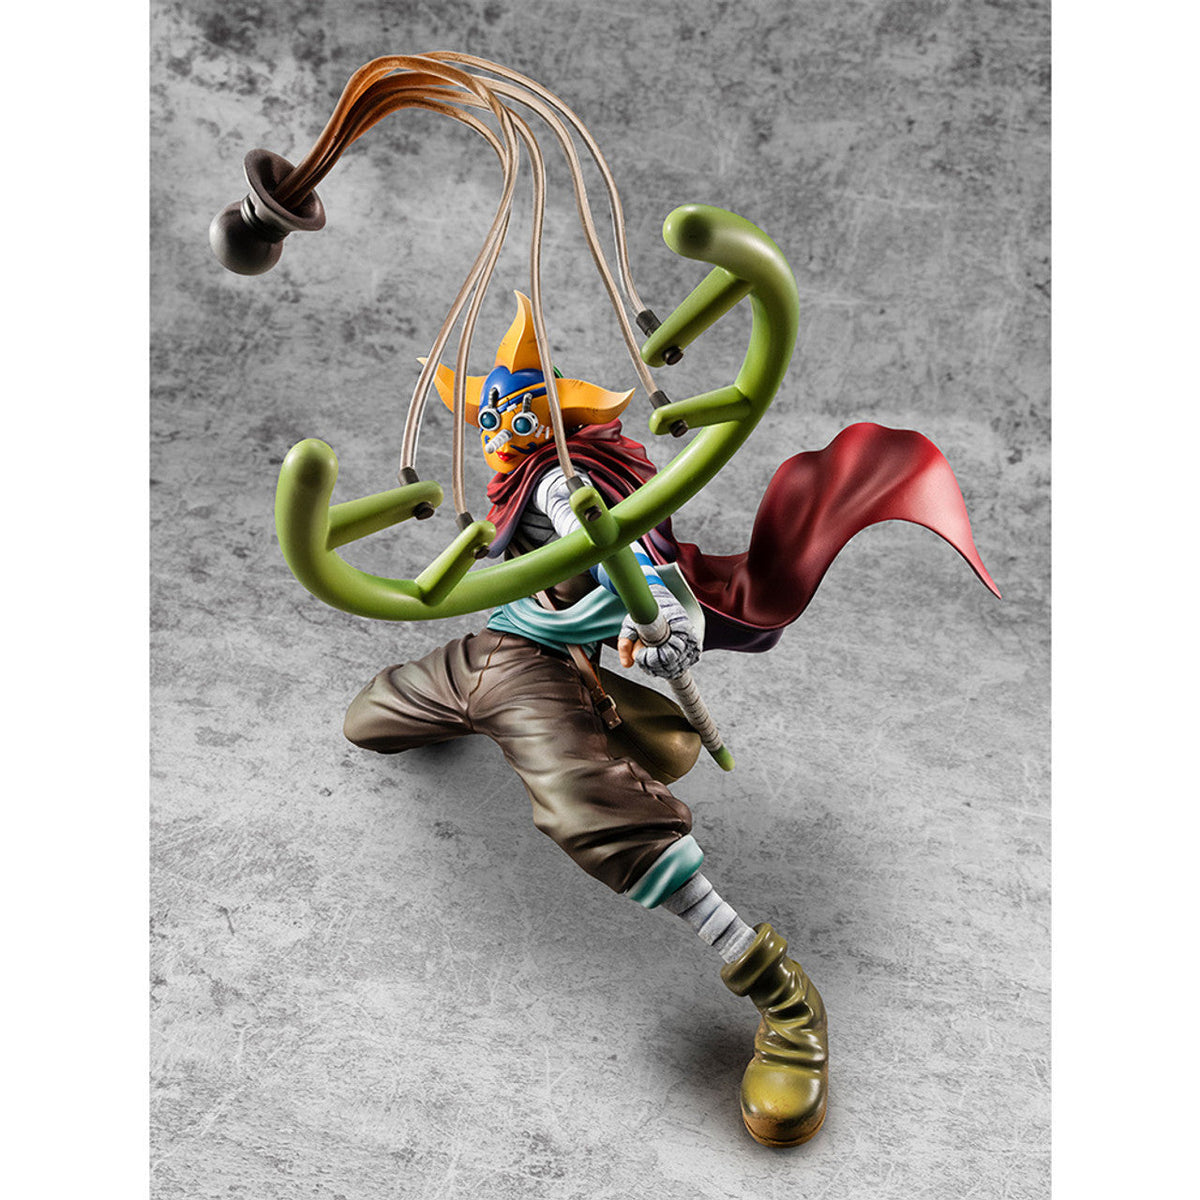 Portrait.Of.Pirates One Piece &quot;Soge King&quot; (Playback Memories)-MegaHouse-Ace Cards &amp; Collectibles